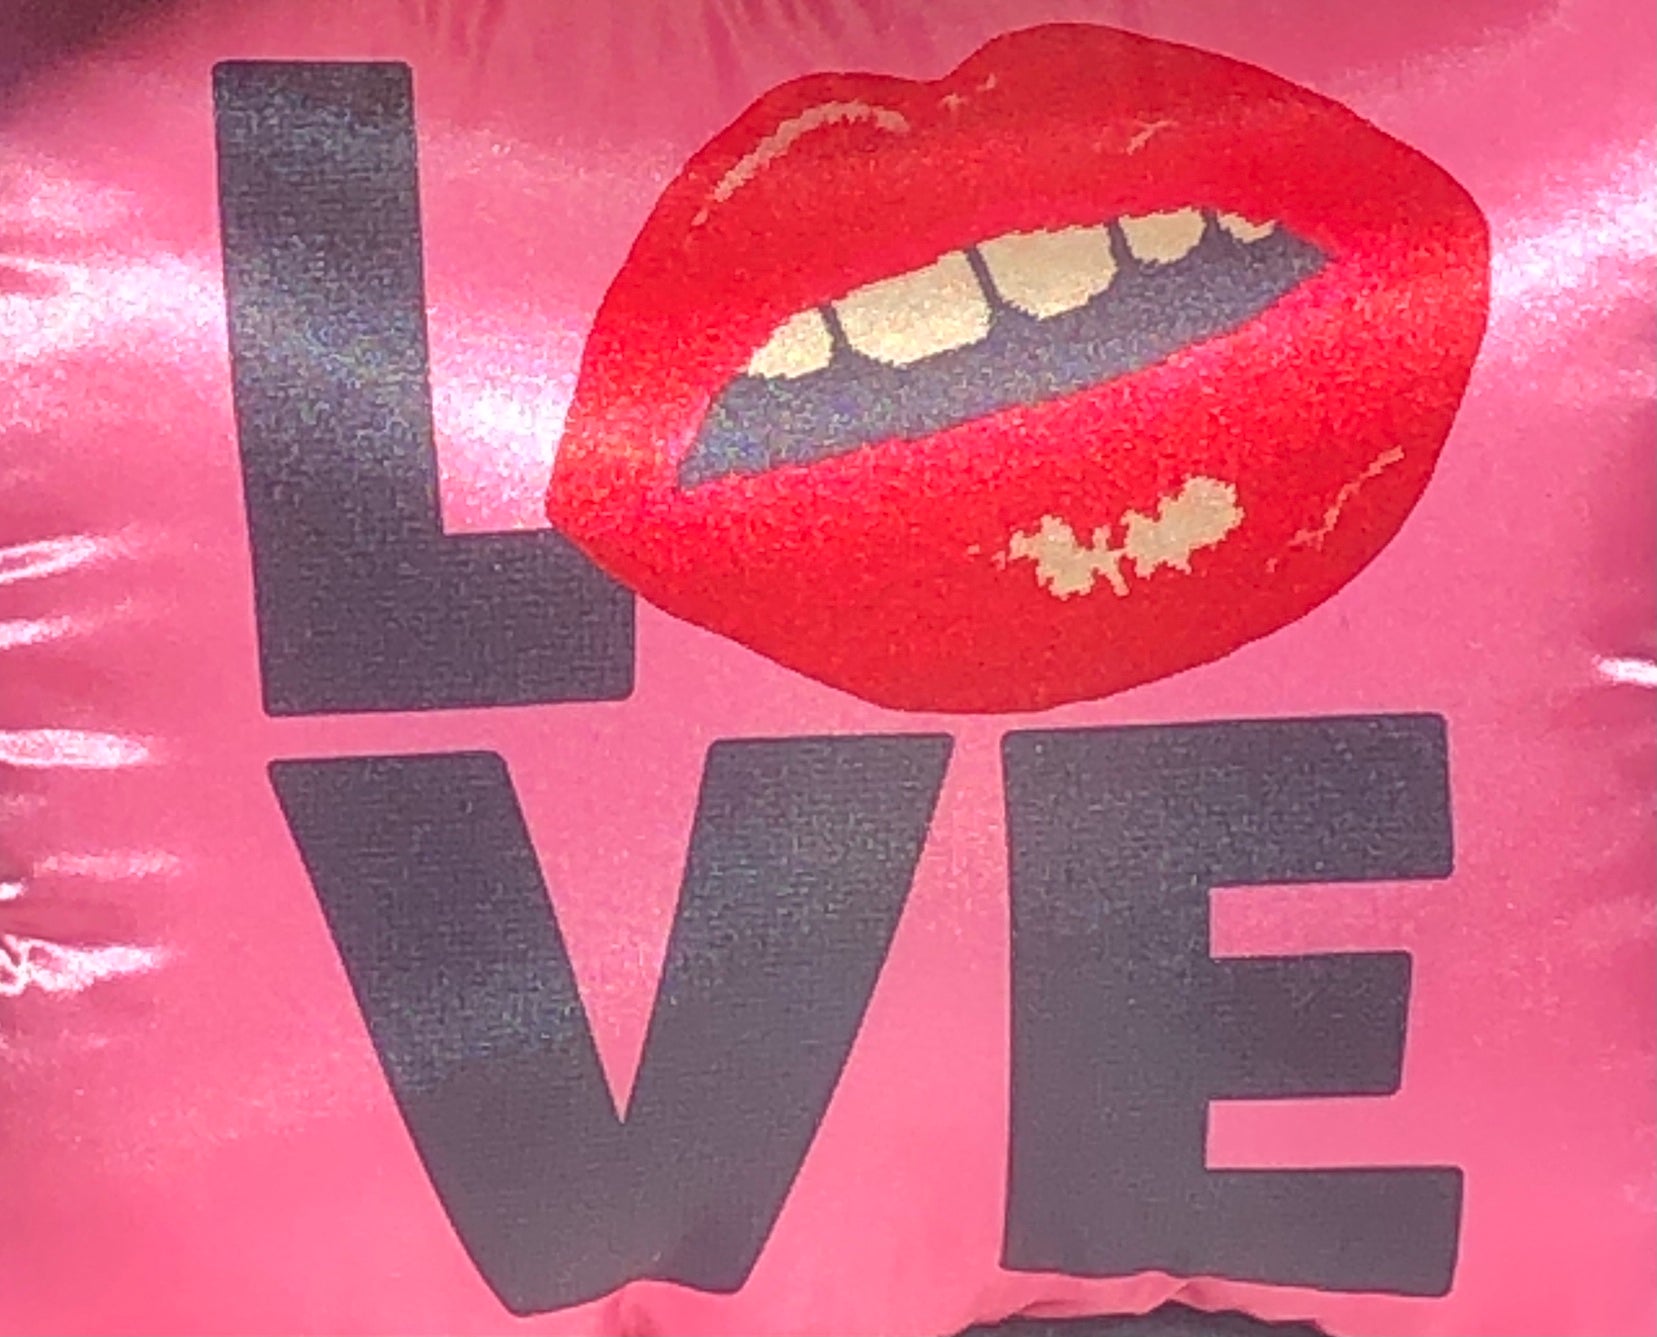 hot pink pillow with blackletters - L, red lips for an O, V & E stacked underneath